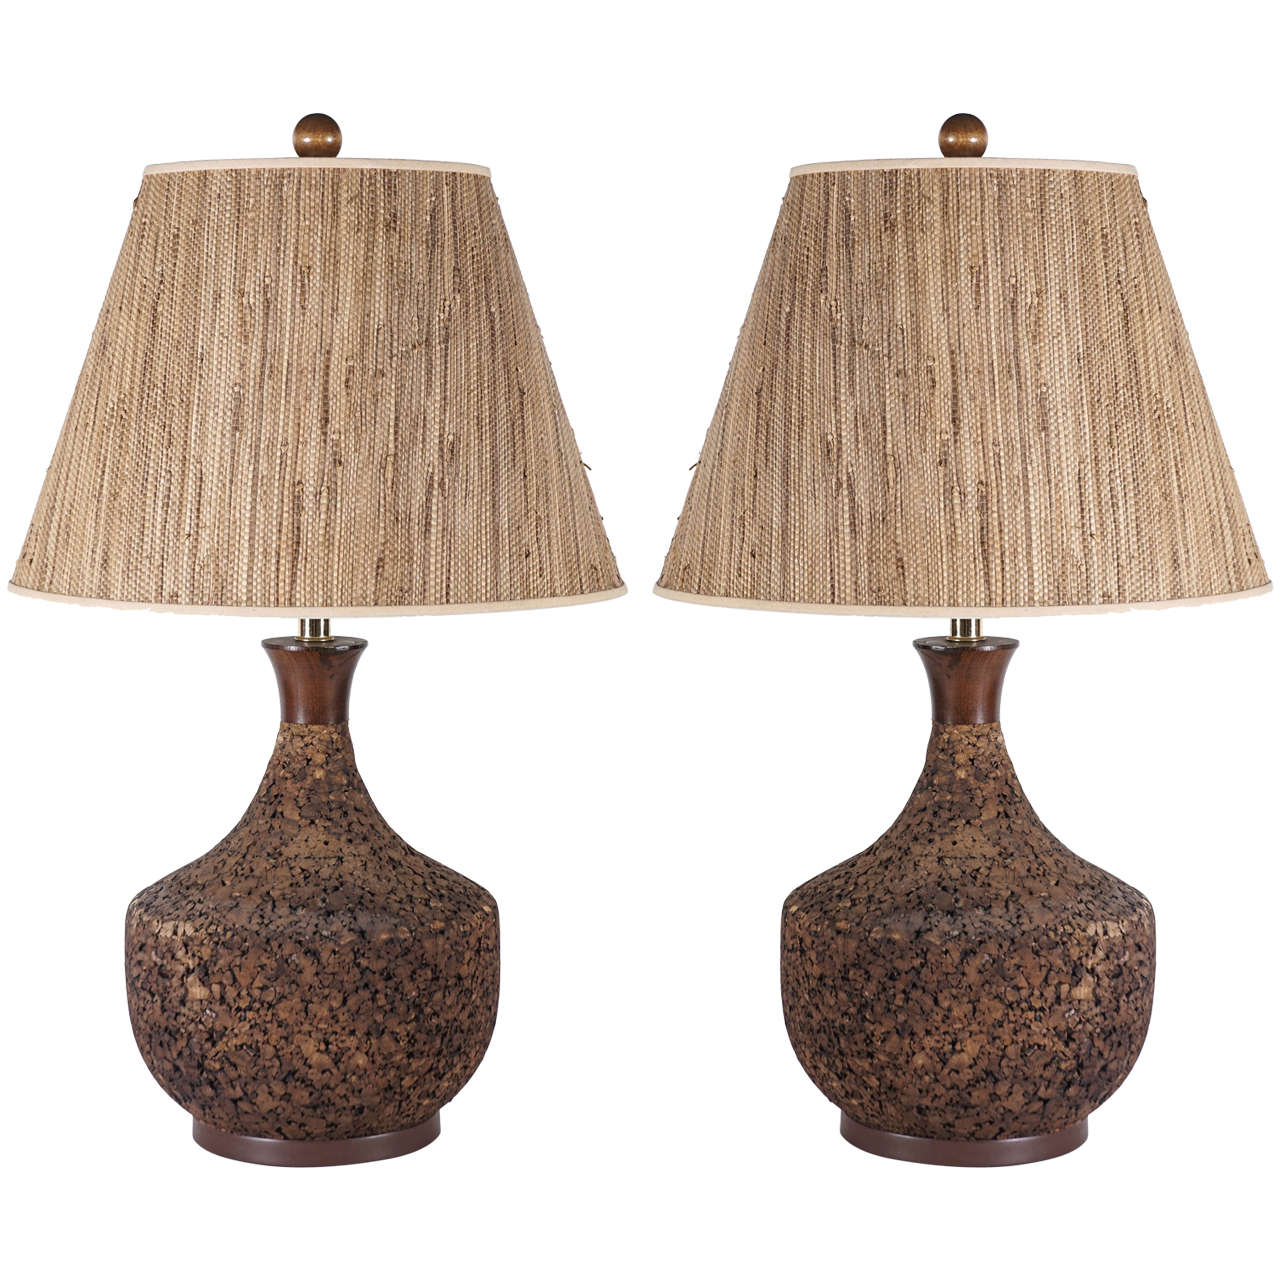 Pair of Oversized Cork and Wood Table Lamps at 1stDibs